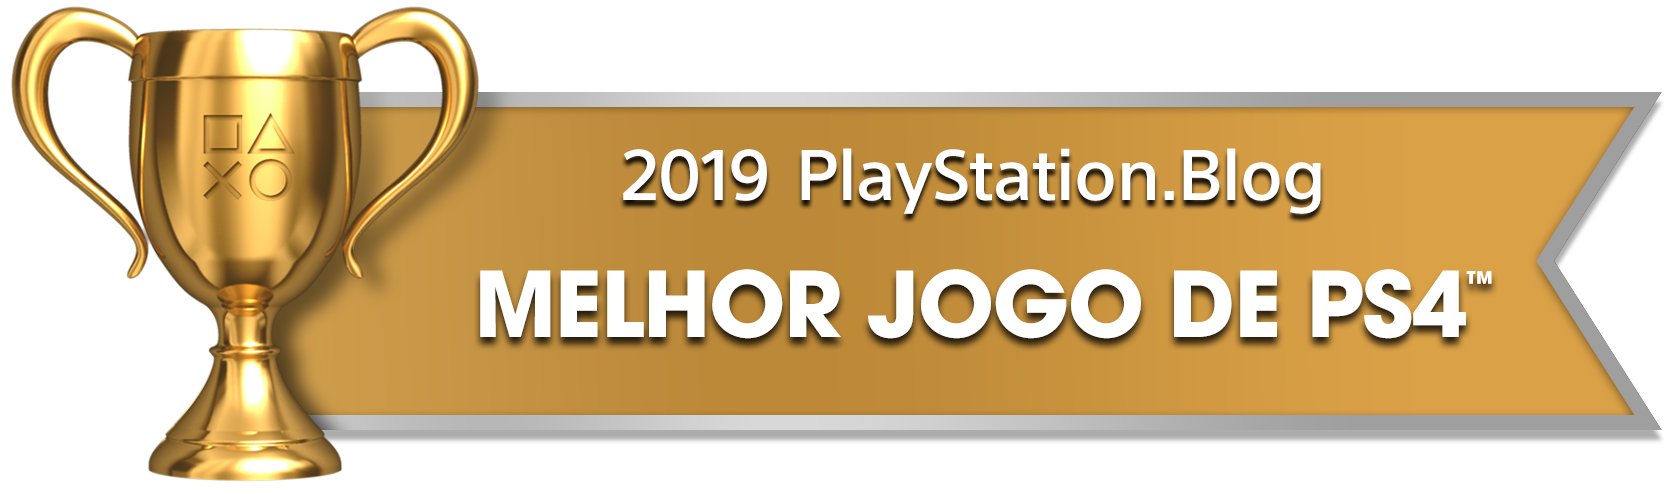 PS Blog Game of the Year 2019 - Best PS4 Game - 2 - Gold